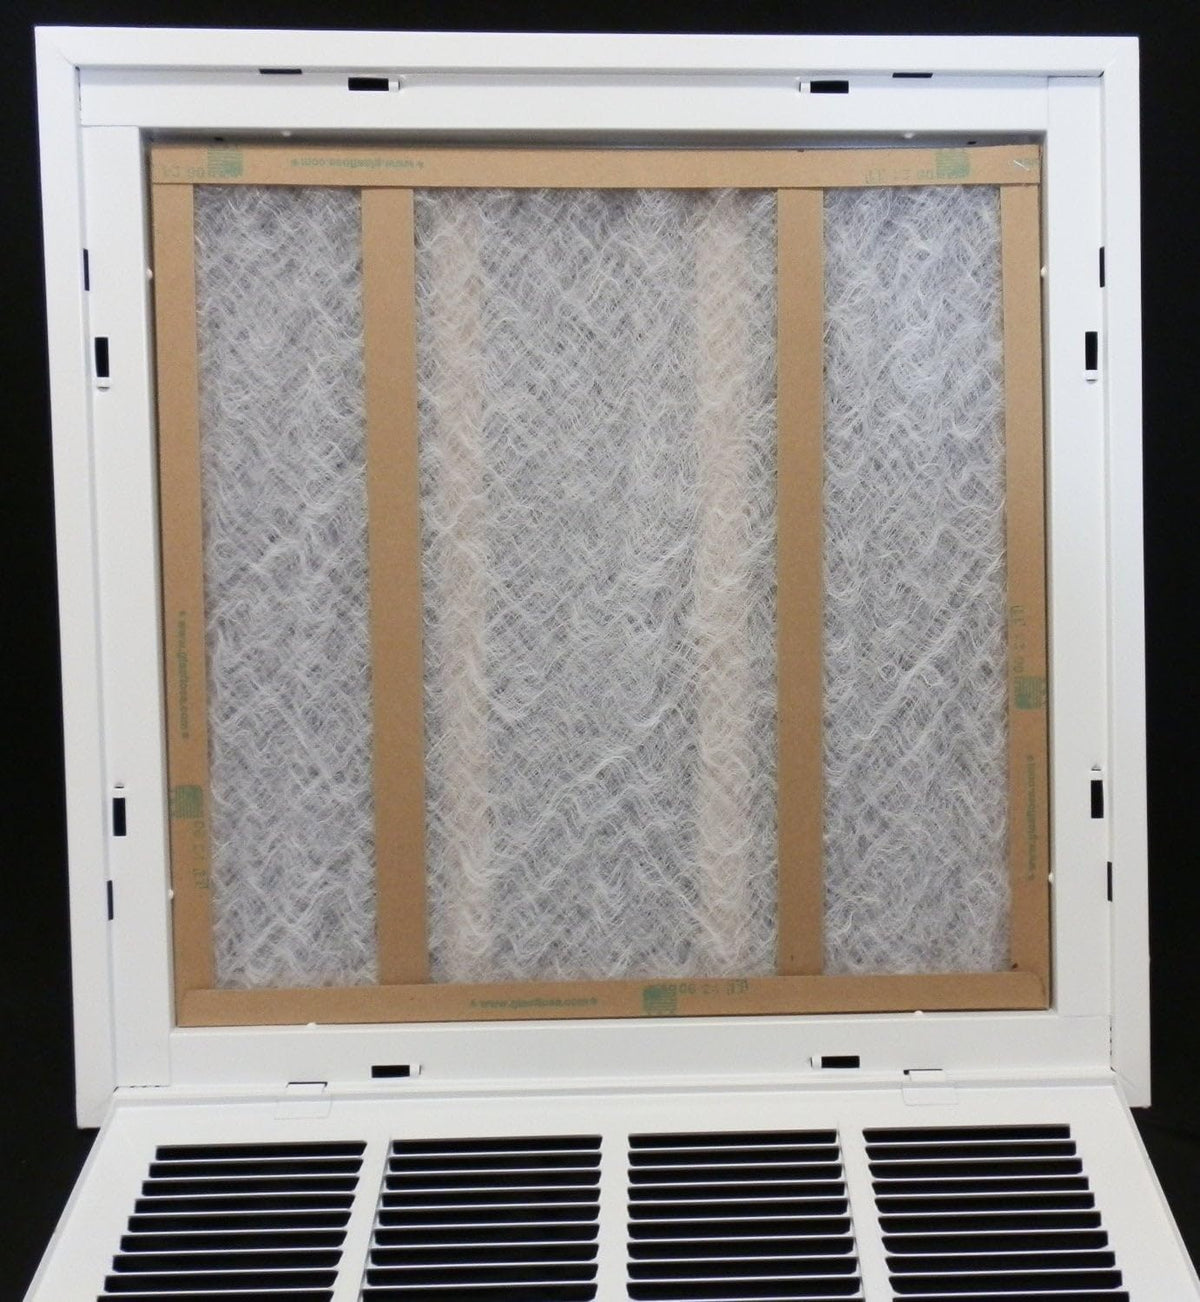 18&quot; X 34&quot; Steel Return Air Filter Grille for 1&quot; Filter - Removable Frame - [Outer Dimensions: 20 5/8&quot; X 36 5/8&quot;]